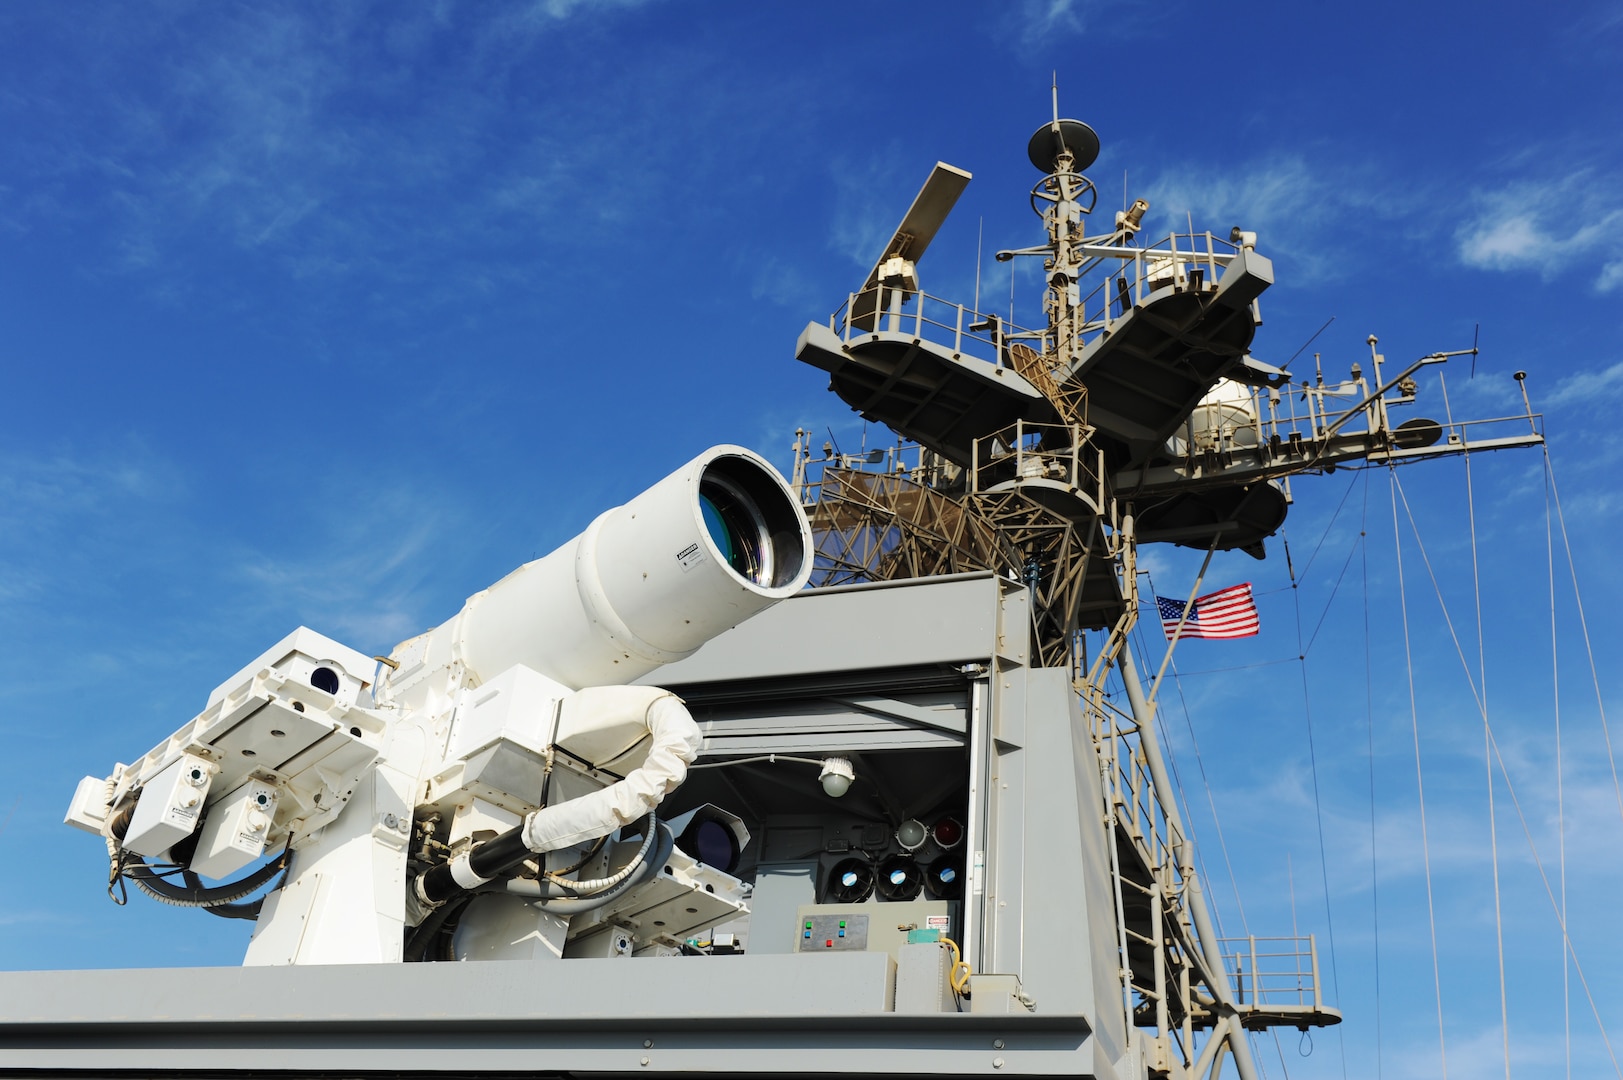 ARABIAN GULF (Nov. 16, 2014) The Afloat Forward Staging Base (Interim) USS Ponce (ASB(I) 15) conducts an operational demonstration of the Office of Naval Research (ONR)-sponsored Laser Weapon System (LaWS) while deployed to the Arabian Gulf. (U.S. Navy photo by John F. Williams/Released)                                                                                                                         